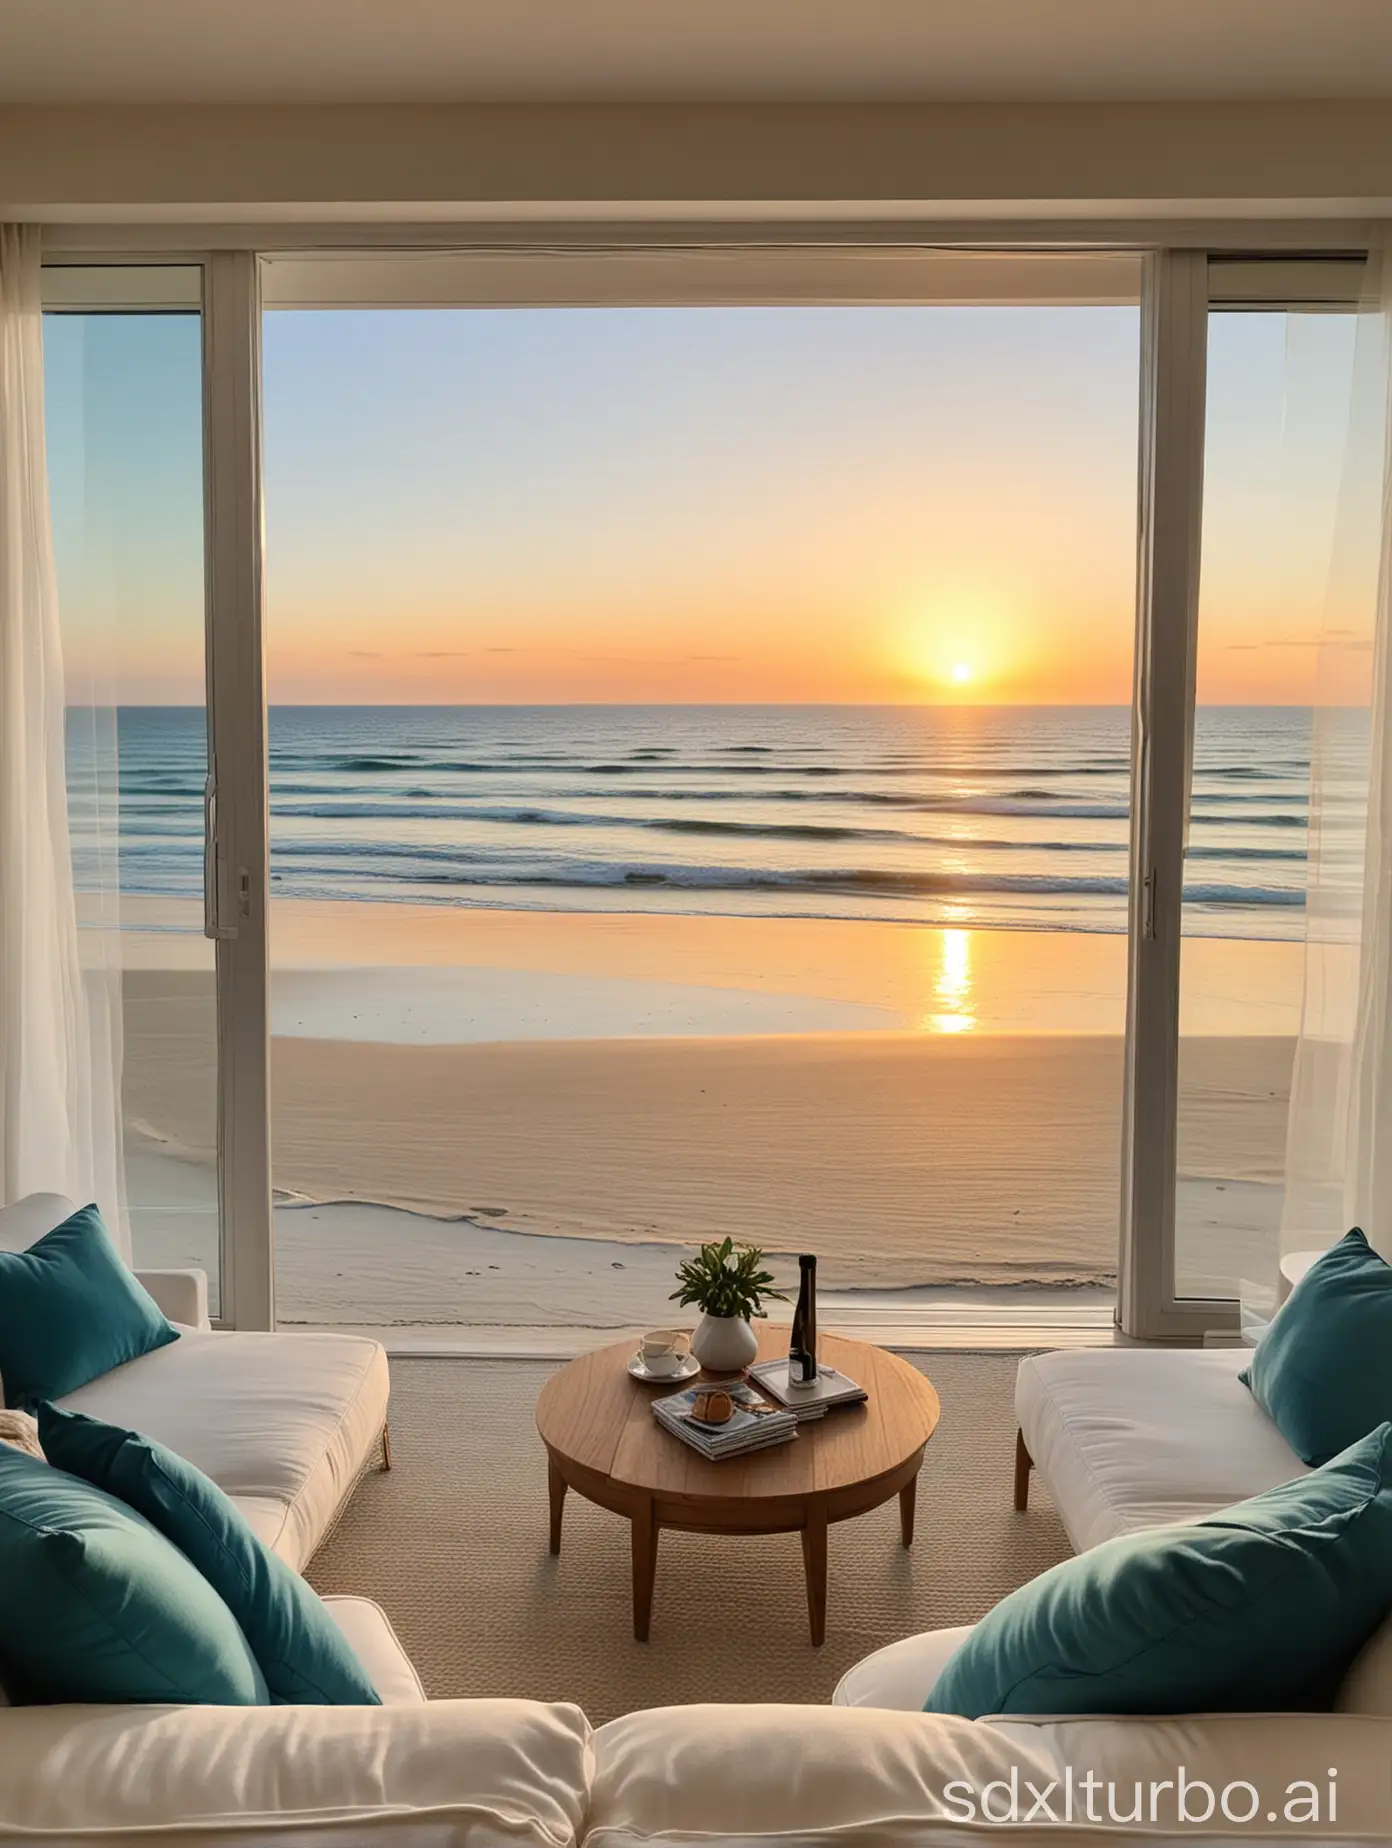 "Enjoy a stunning panoramic view of the beach, where the blue ocean stretches as far as the eye can see. From a top-floor apartment, immerse yourself in the serenity of the sea as you relax in your comfortable living room. Gentle waves gently break on the shore as the golden sun paints the horizon, creating an atmosphere of peace and tranquility."